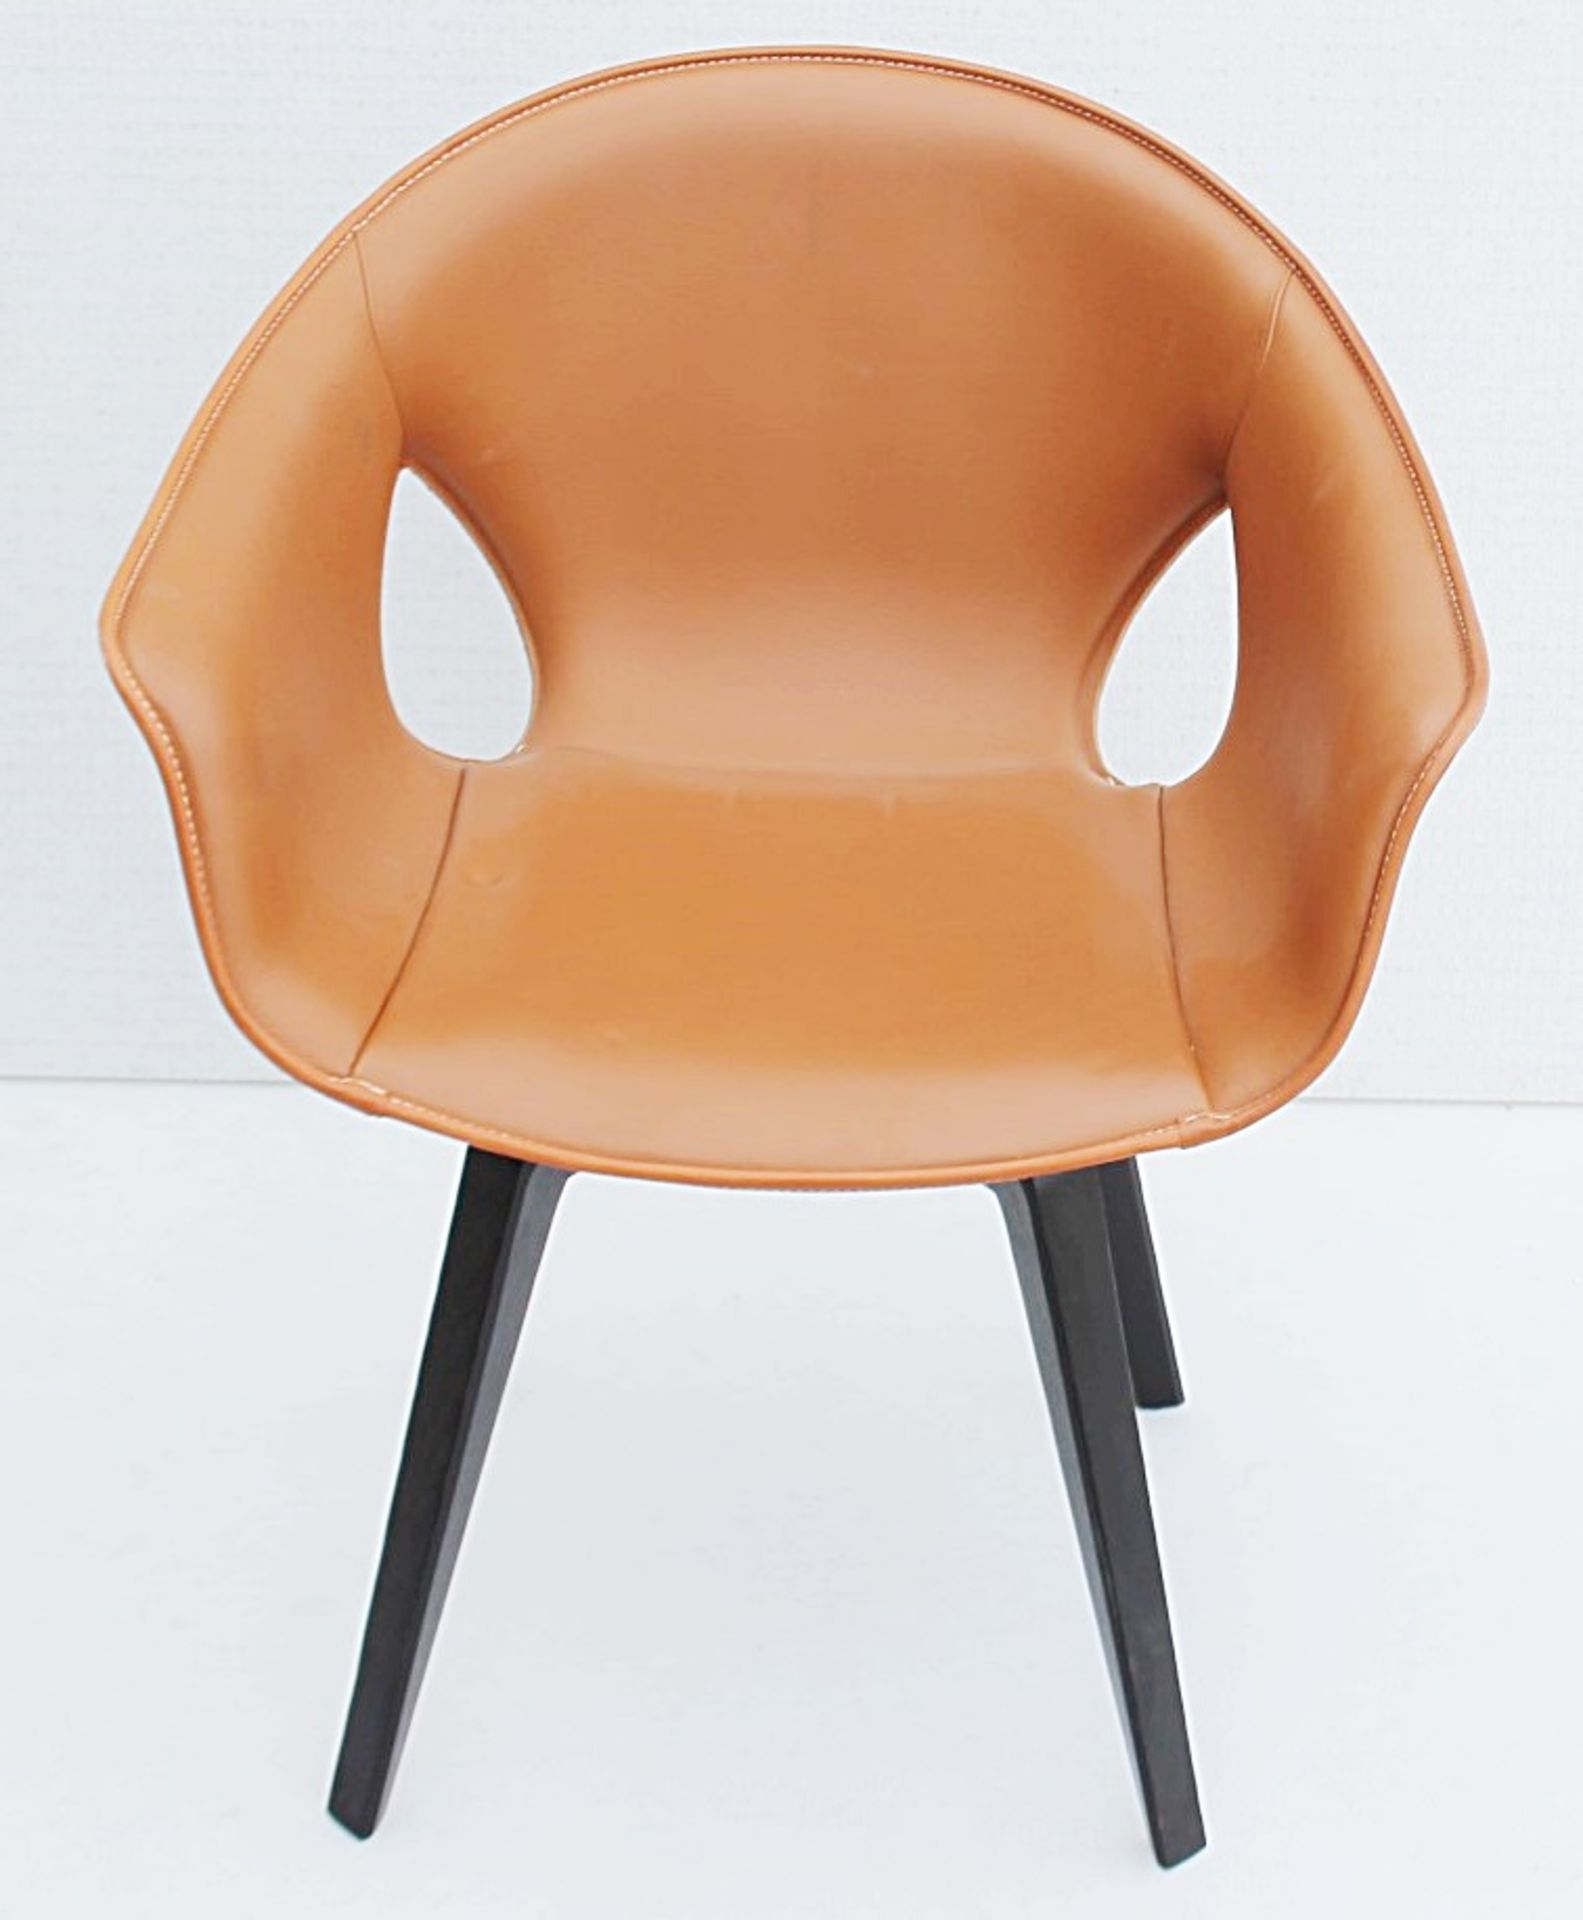 1 x POLTRONA FRAU 'Ginger' Designer Leather Swivel Chair In Bespoke Colours - Original Price £3,299 - Image 2 of 9